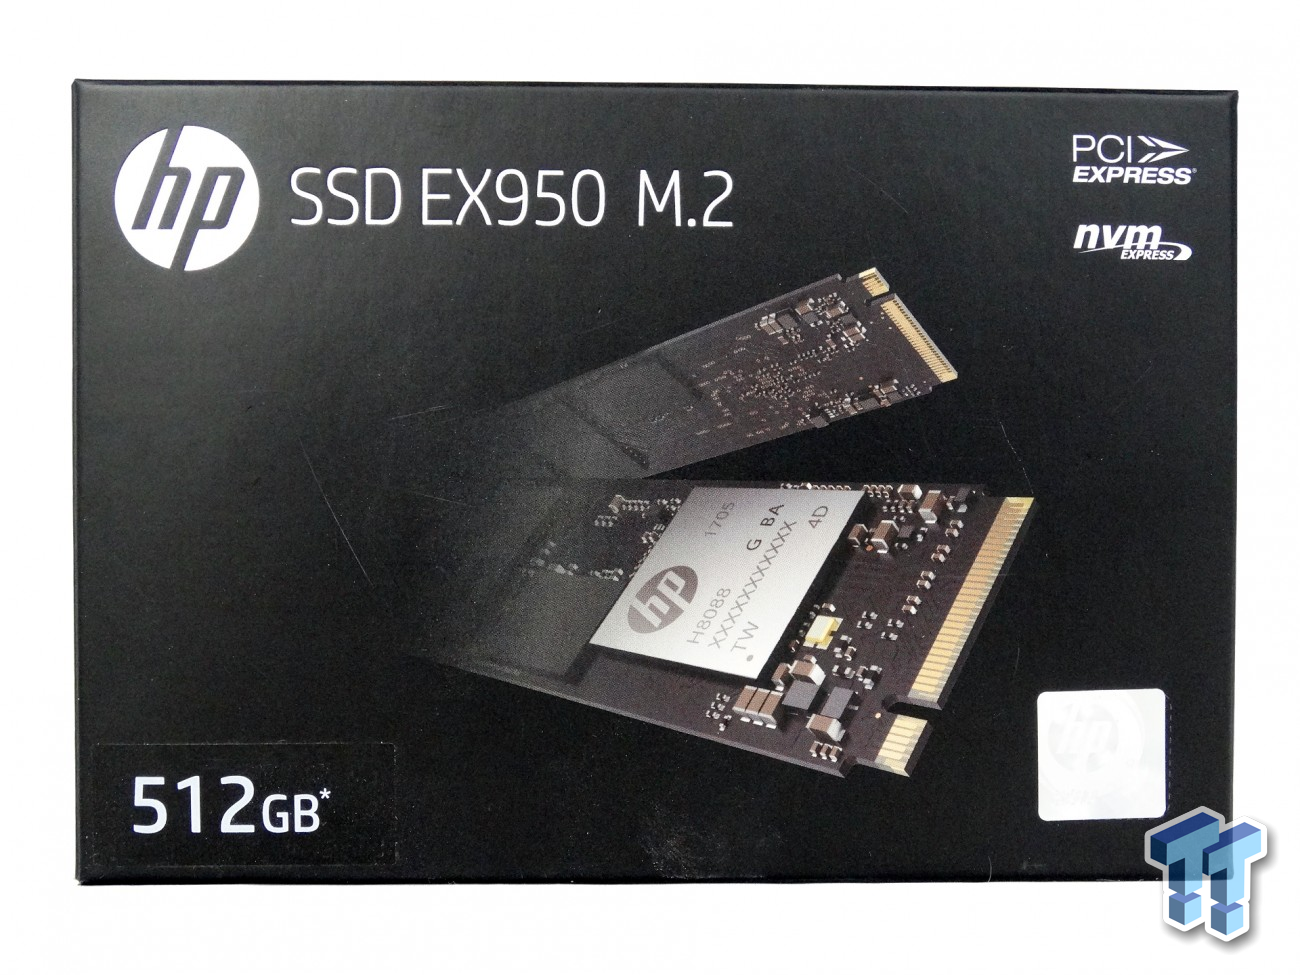 fort læbe galleri HP EX950 512GB SSD Review - A great $120 Upgrade